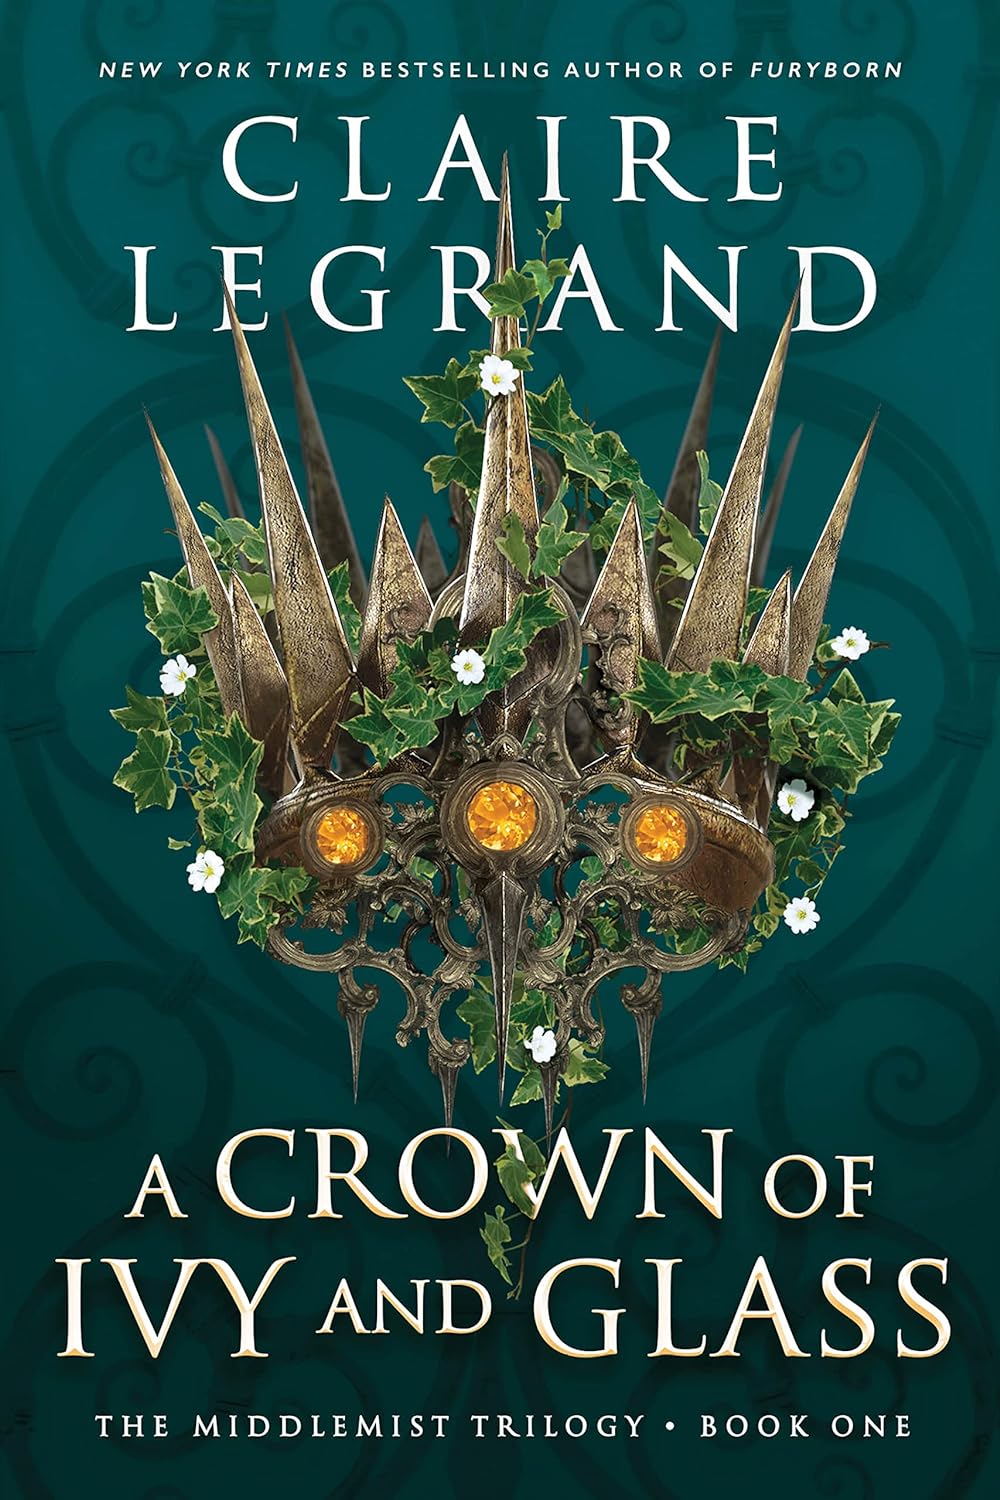 A Crown of Ivy and Glass from the Middlemist Trilogy by Claire LeGrand